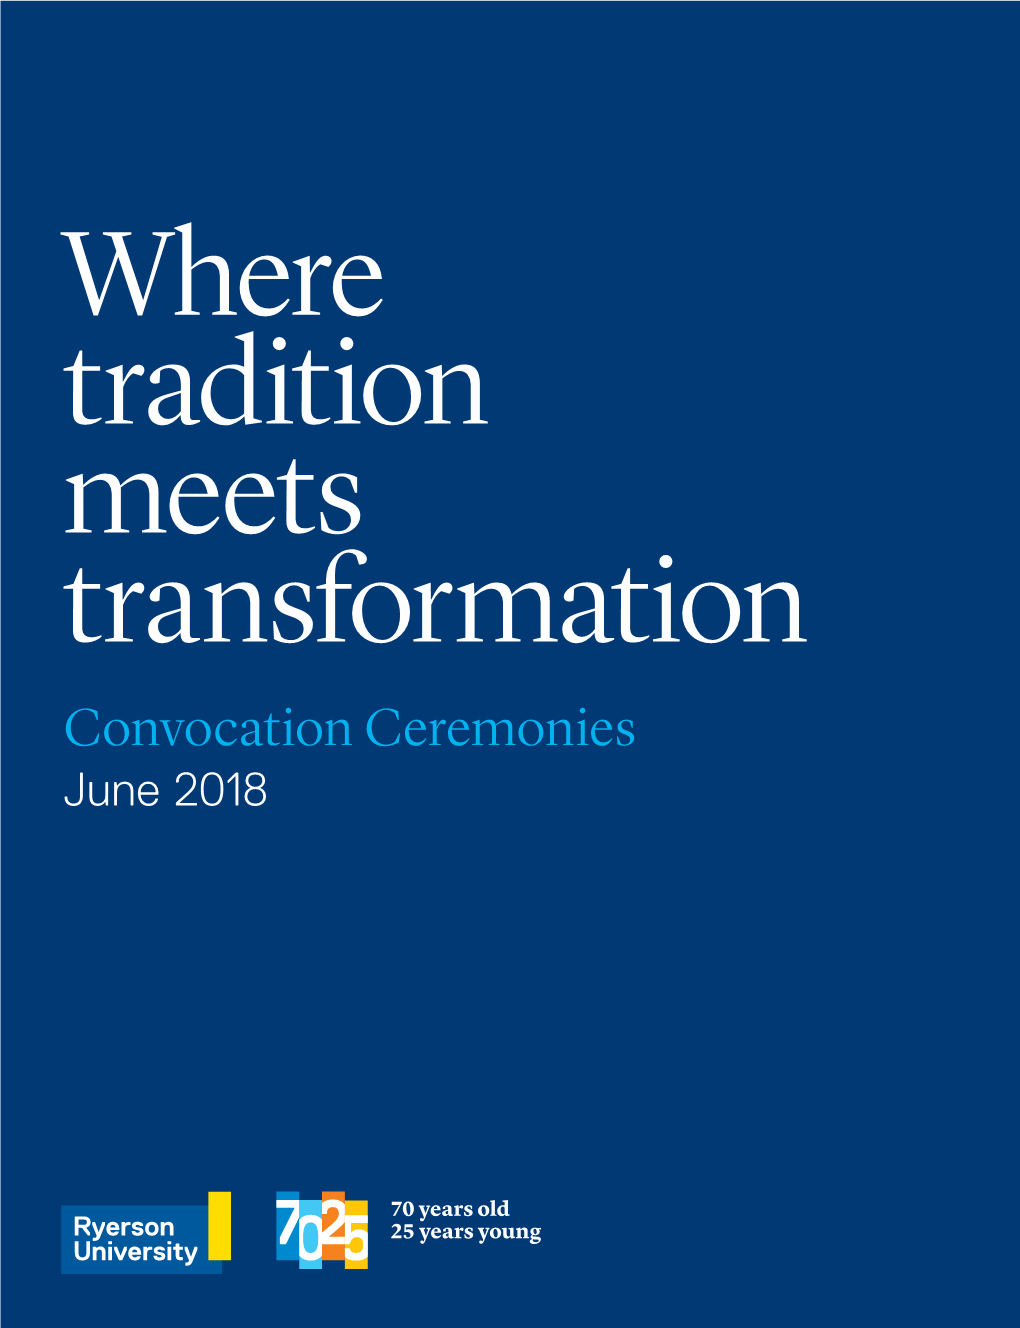 Convocation Ceremonies June 2018 Where Tradition Meets Transformation Convocation Ceremonies June 2018